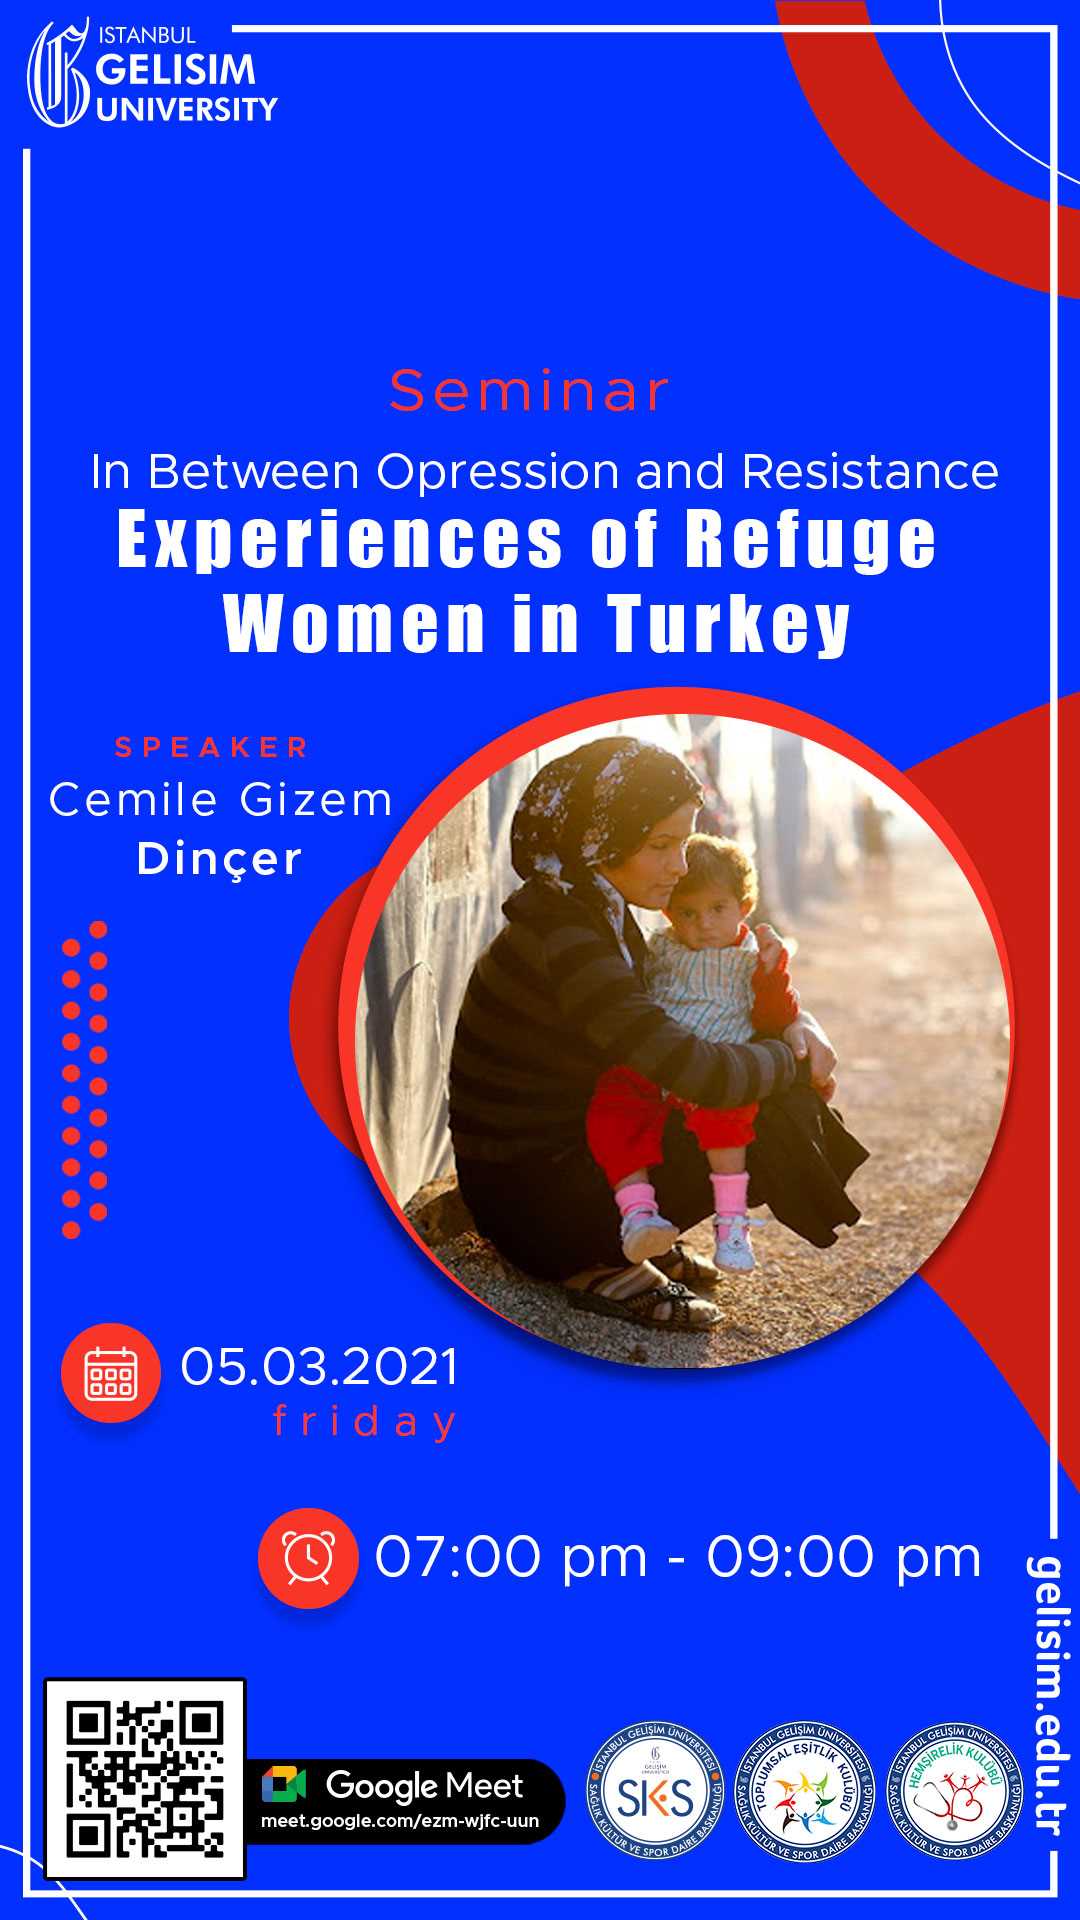 In Between Opression and Resistance Experiences of Refuge Women in Turkey